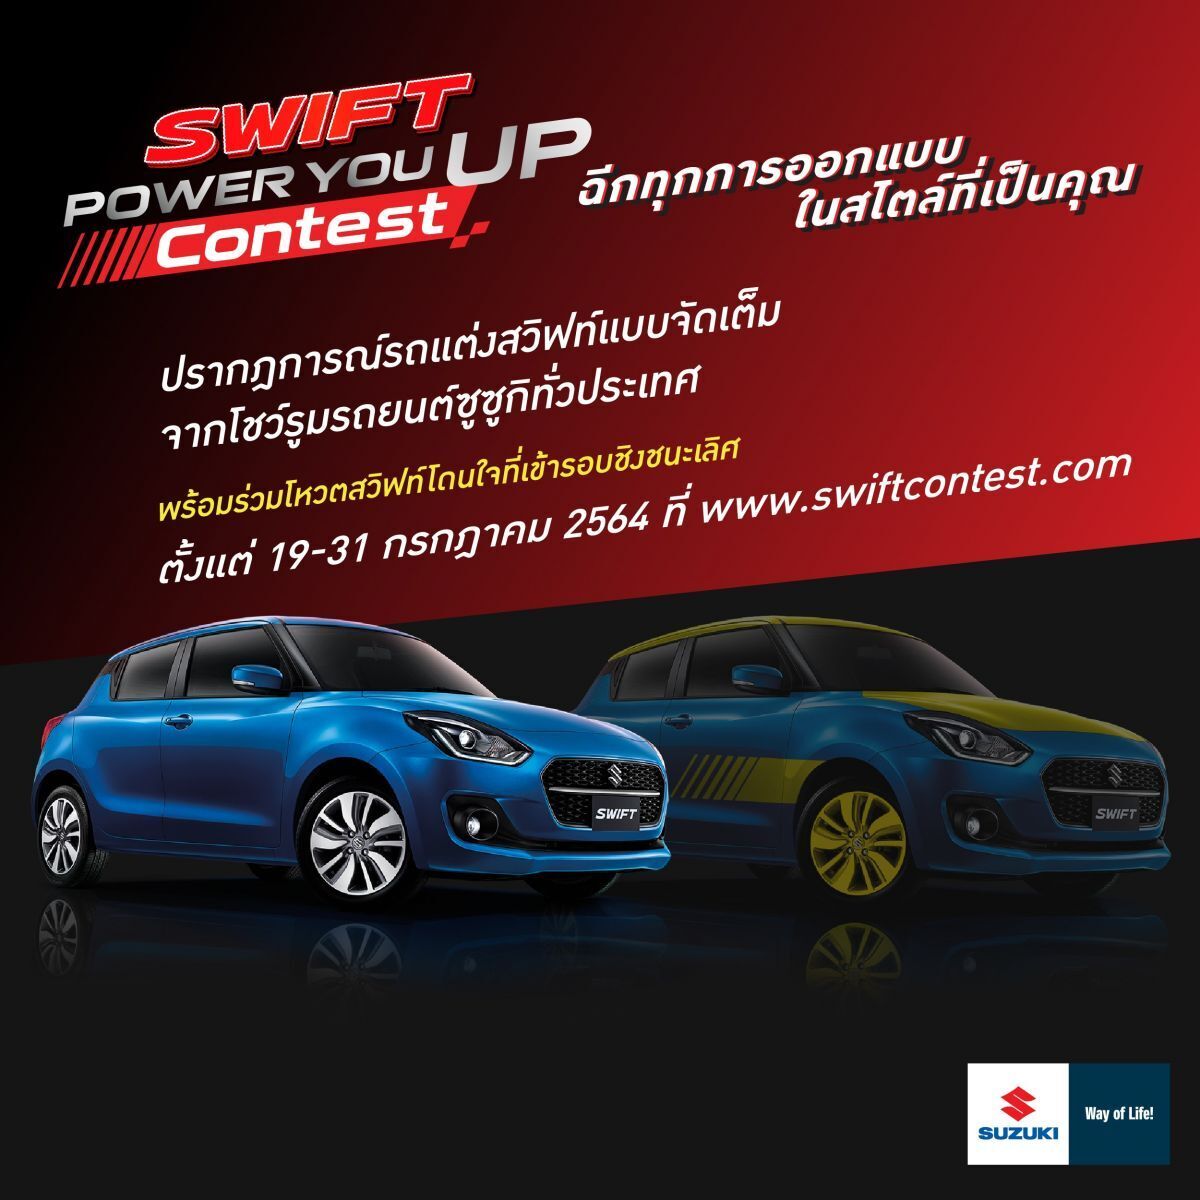 SWIFT POWER YOU UP CONTEST